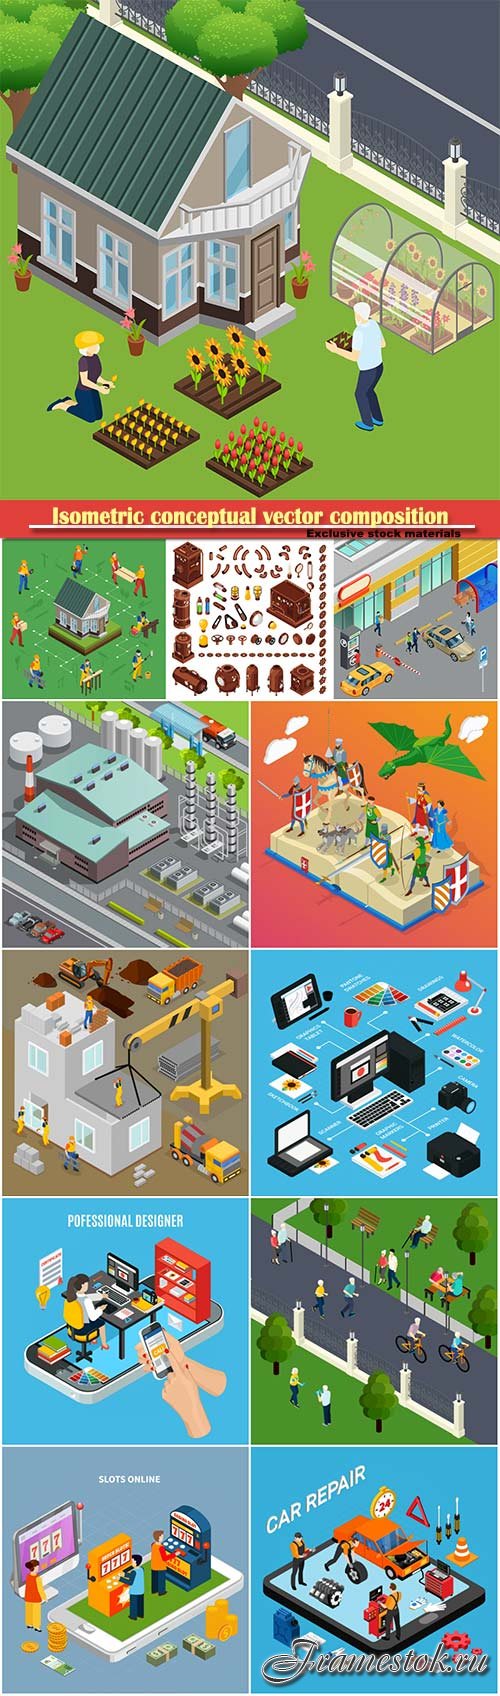 Isometric conceptual vector composition, infographics template # 39